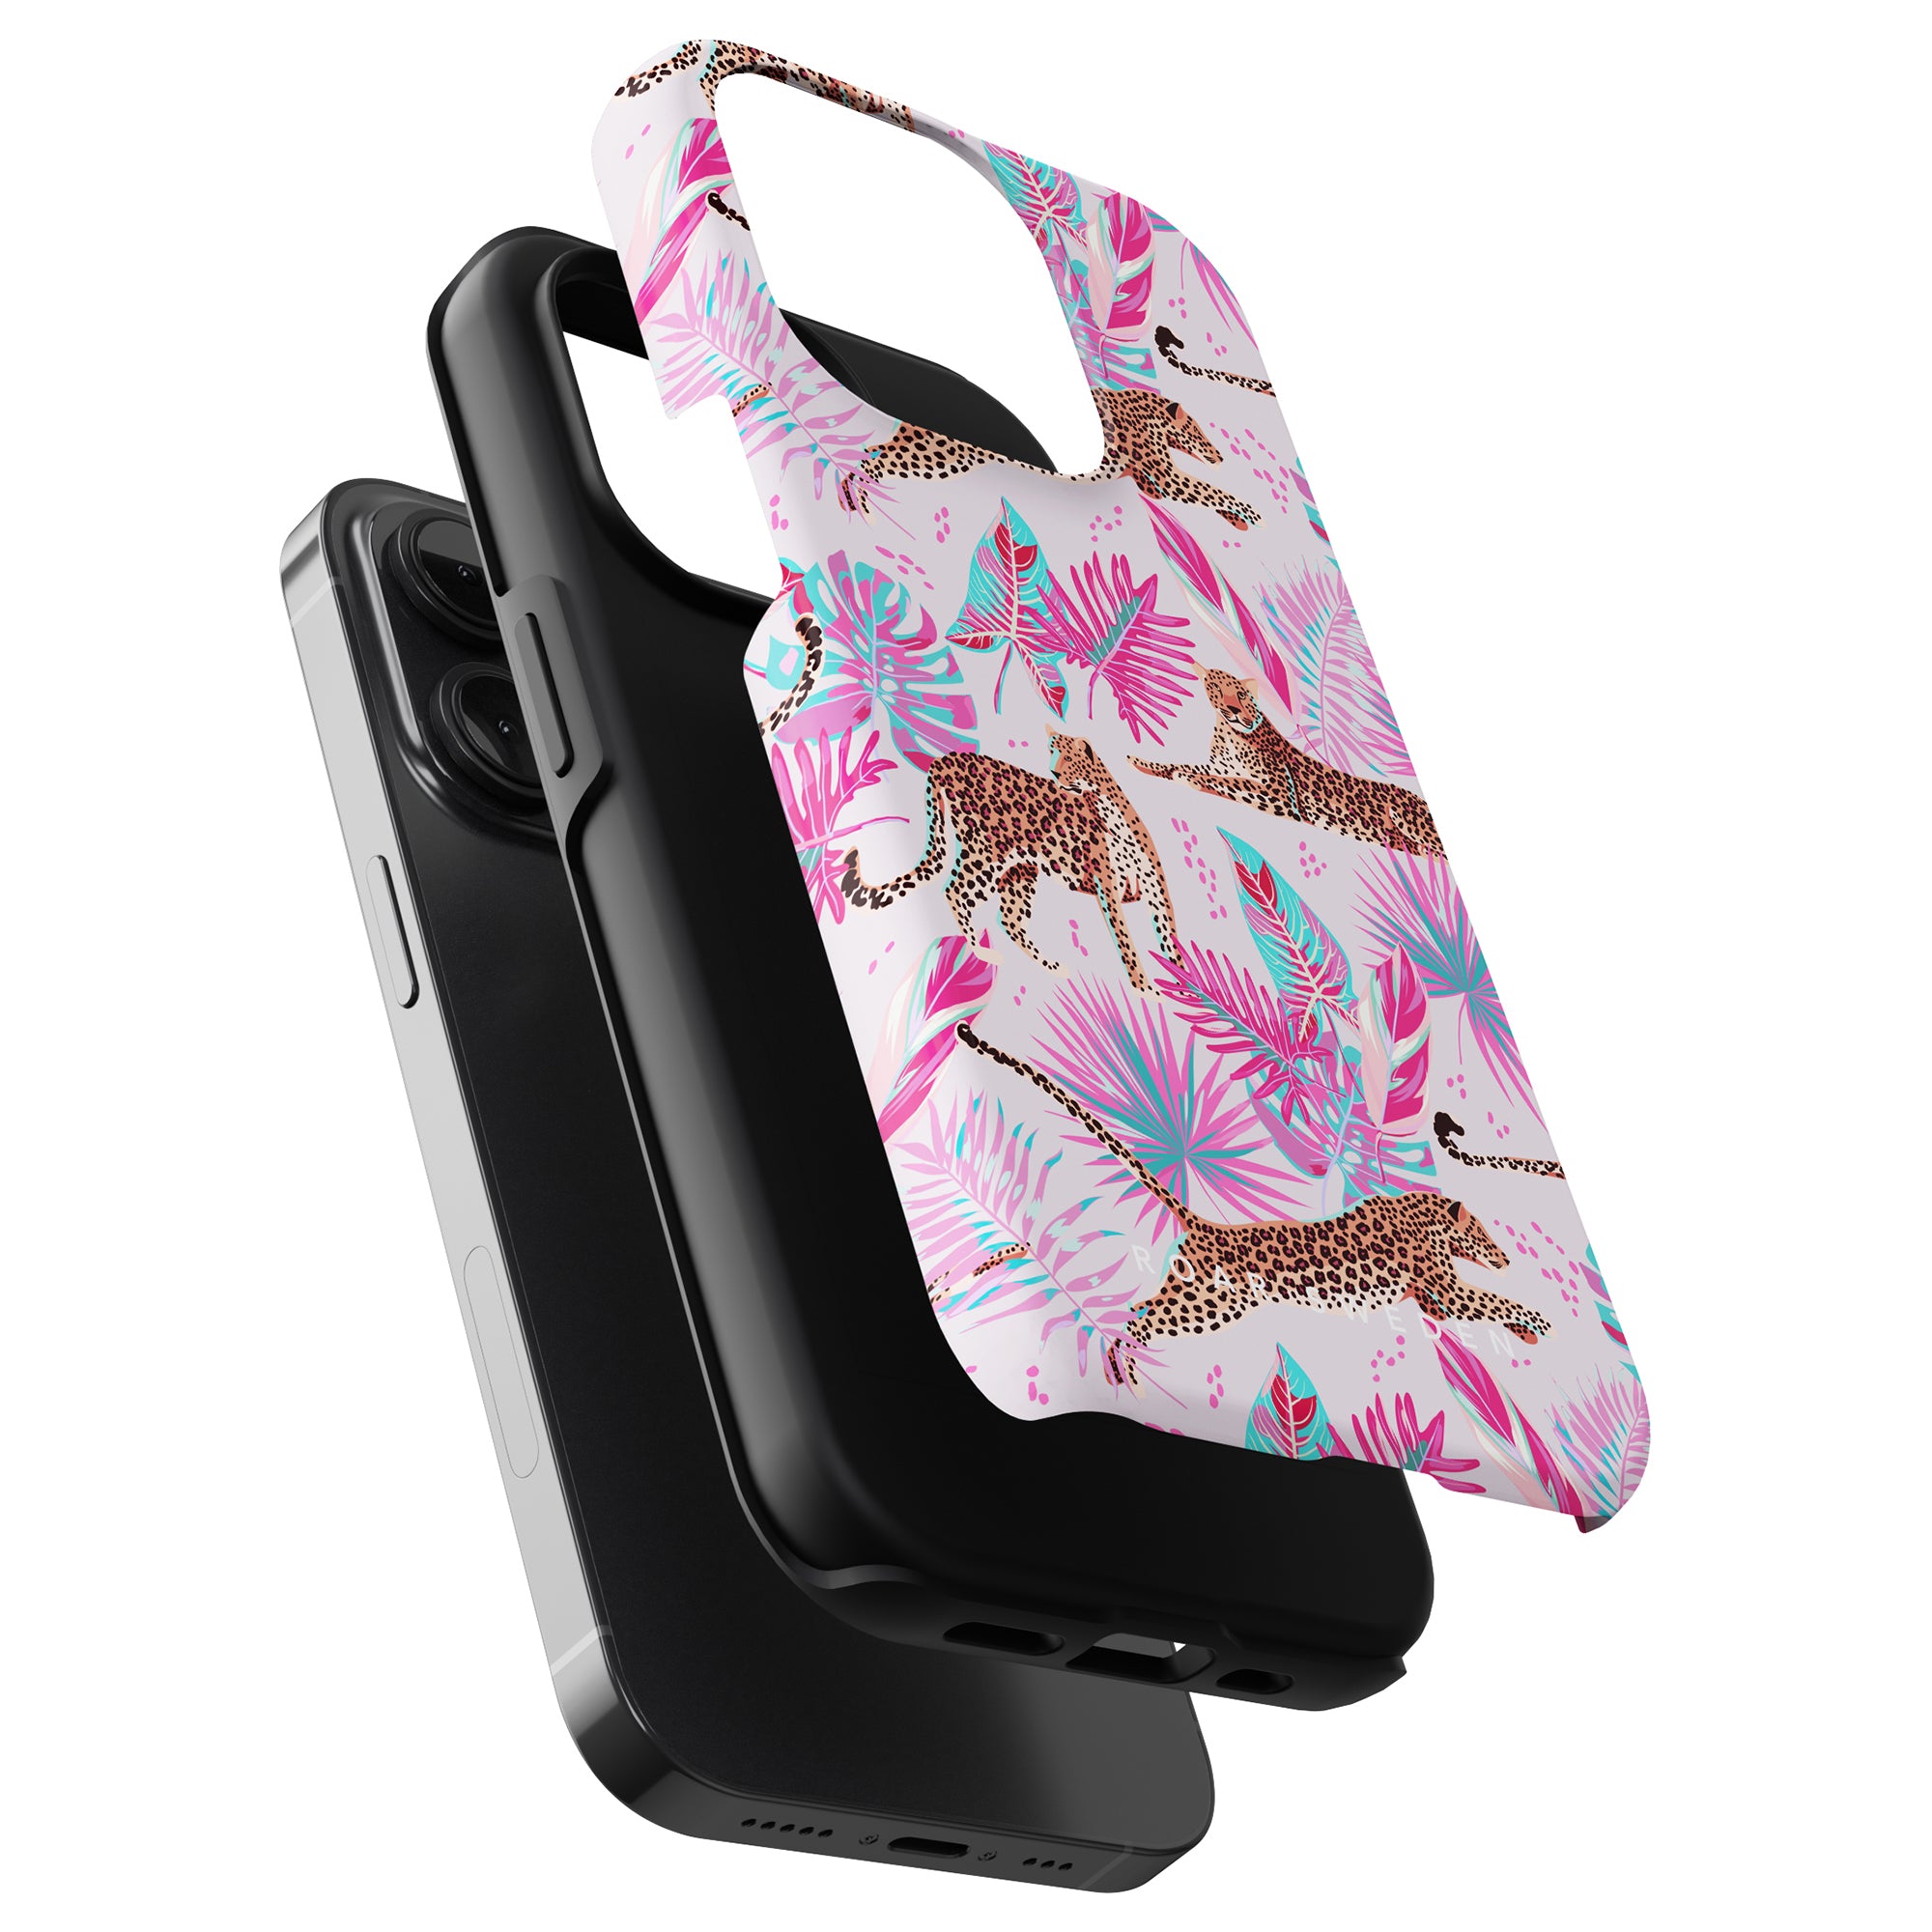 Smartphones with black cases stacked vertically, one featuring a colorful pink and blue floral print from the Chill - Tough Case collection.